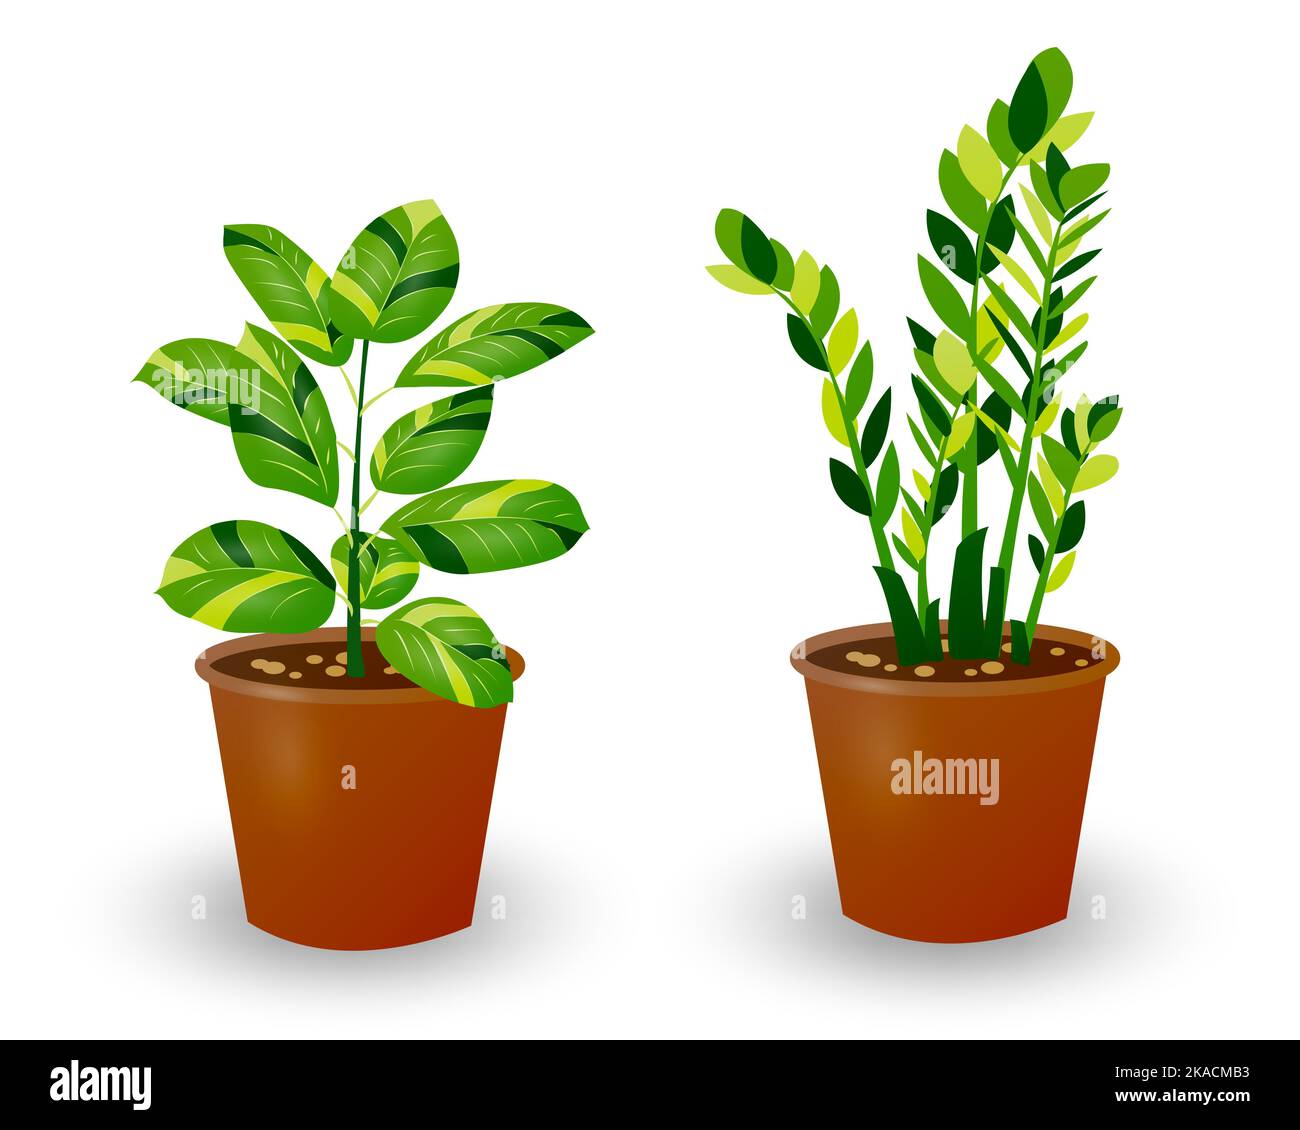 Ficus and Zamiokulkas Dollar Tree plant in pot isolated on white background. Decorative plant for home interior or office. Room flower. Vector illustr Stock Vector